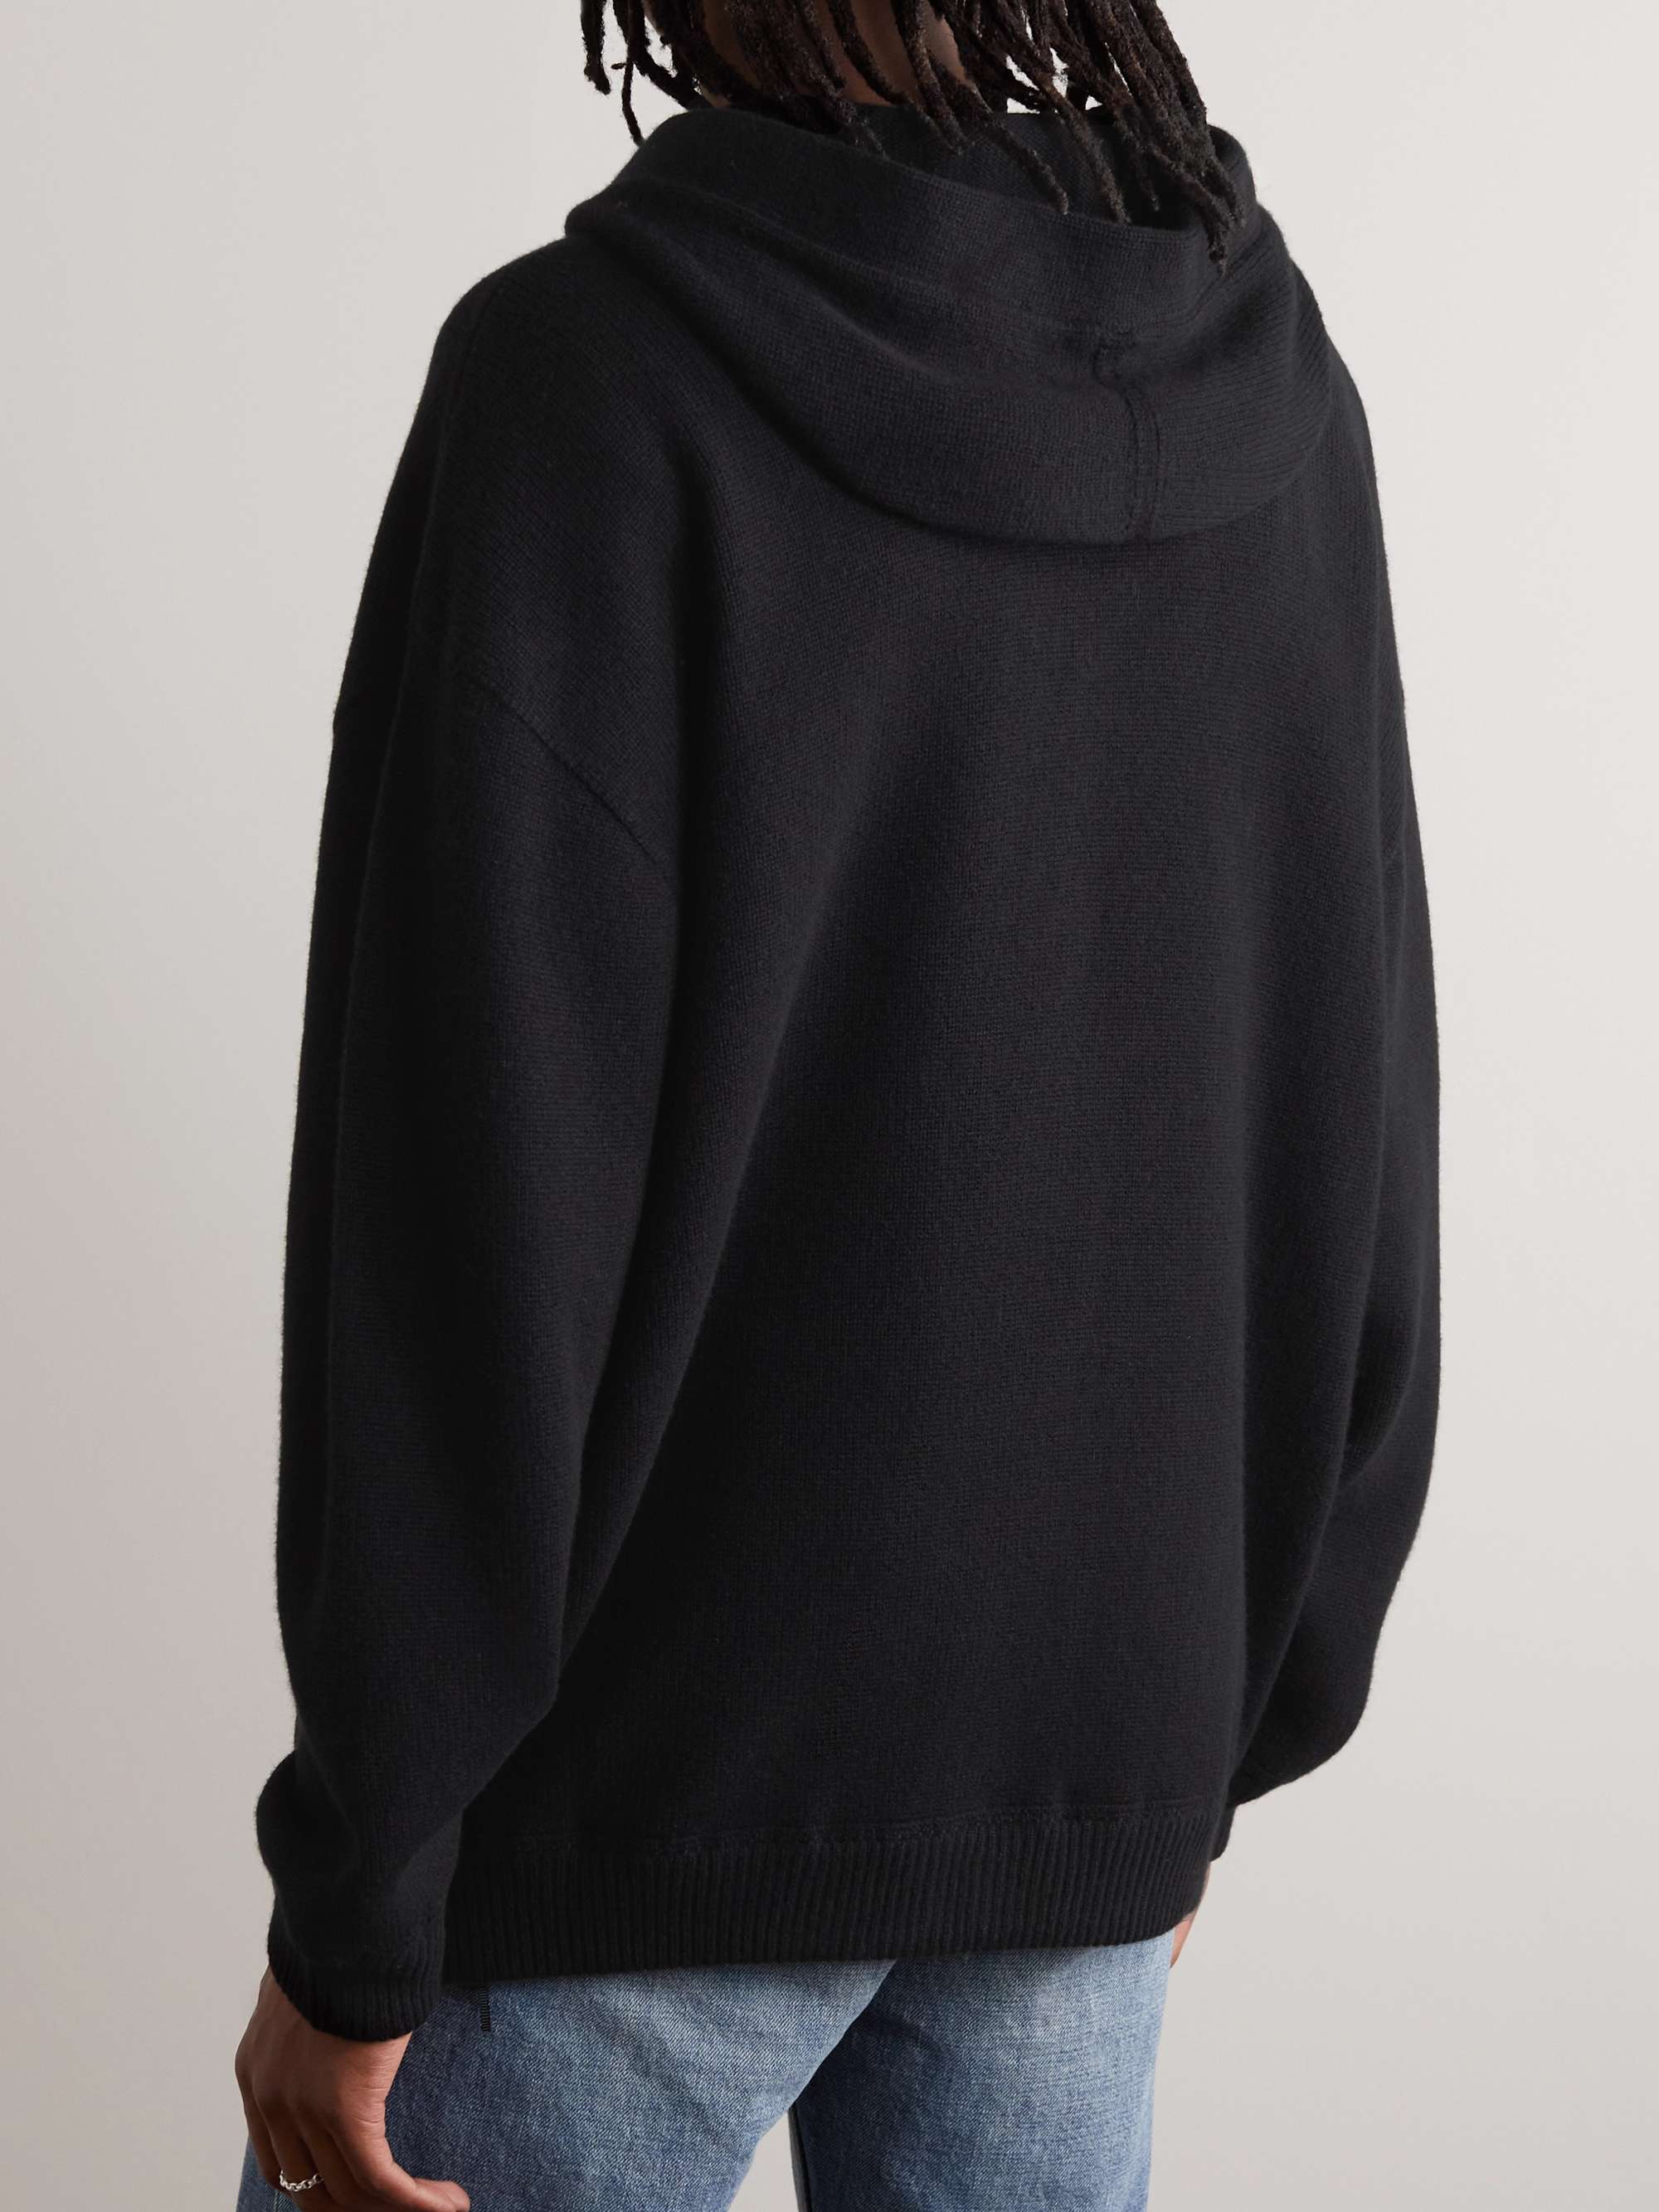 CELINE Oversized Wool and Cashmere-Blend Zip-Up Hoodie